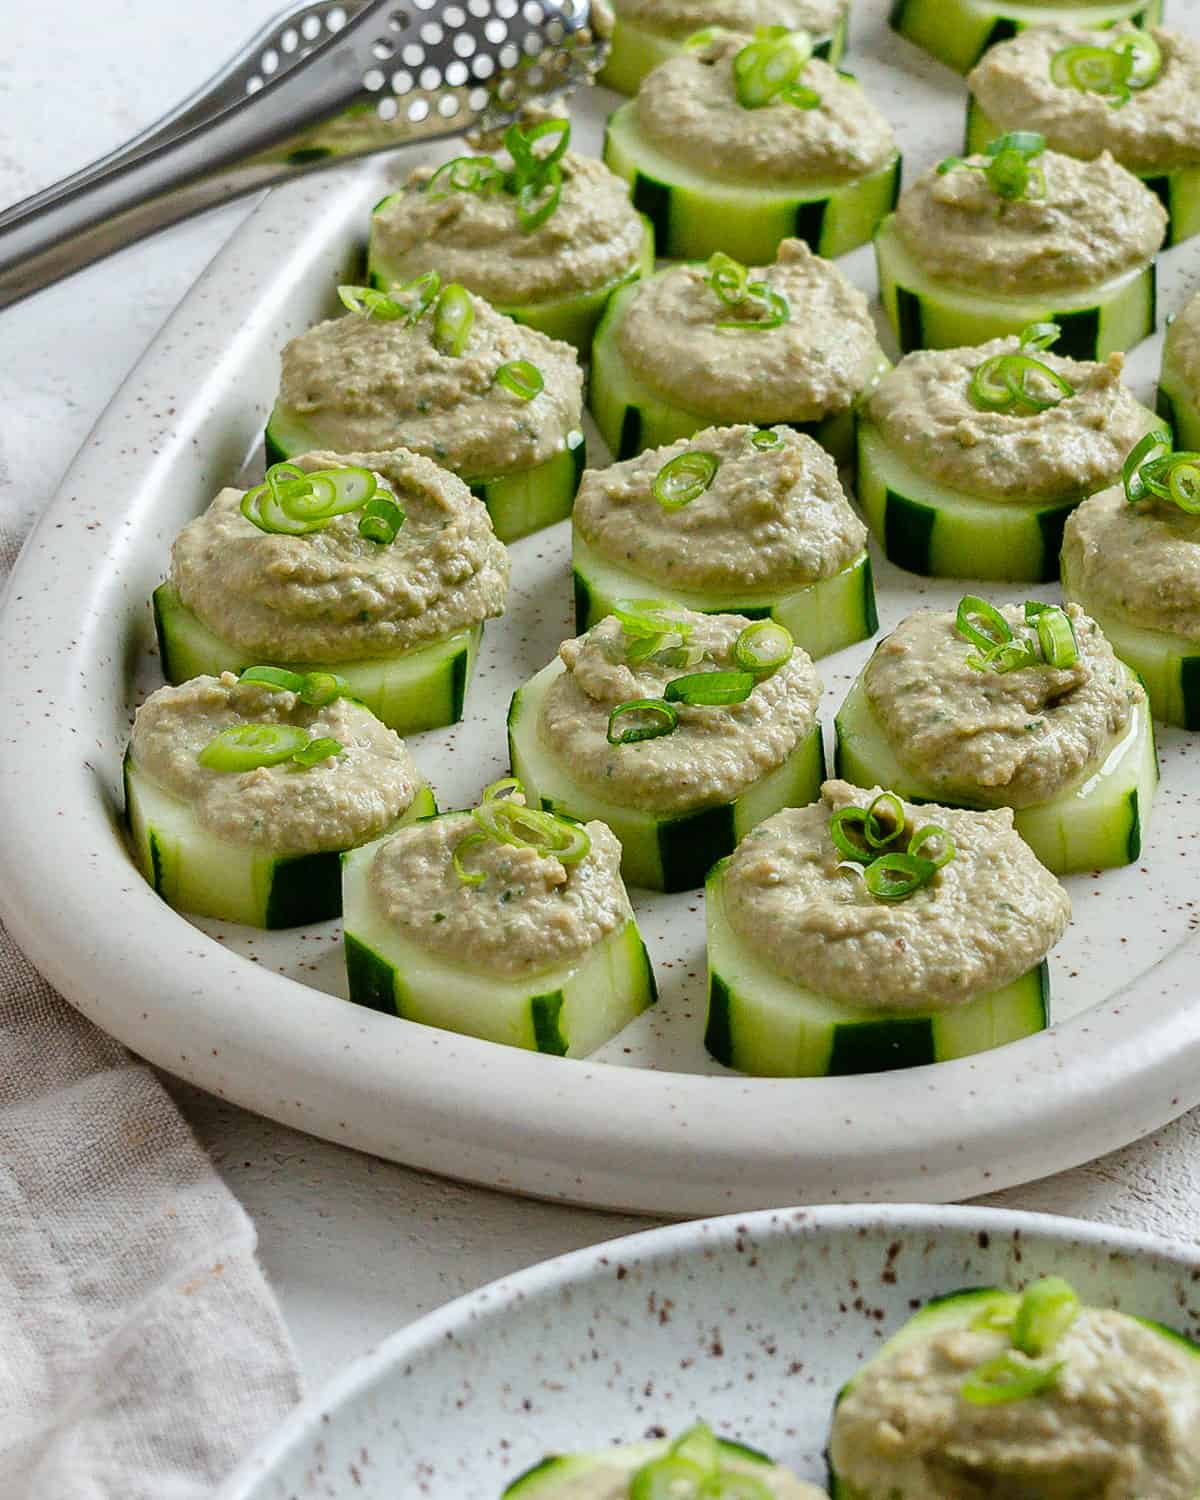 completed Easy Cucumber Bites with Sunflower Chive Cream Cheese plated on a dish against a light background